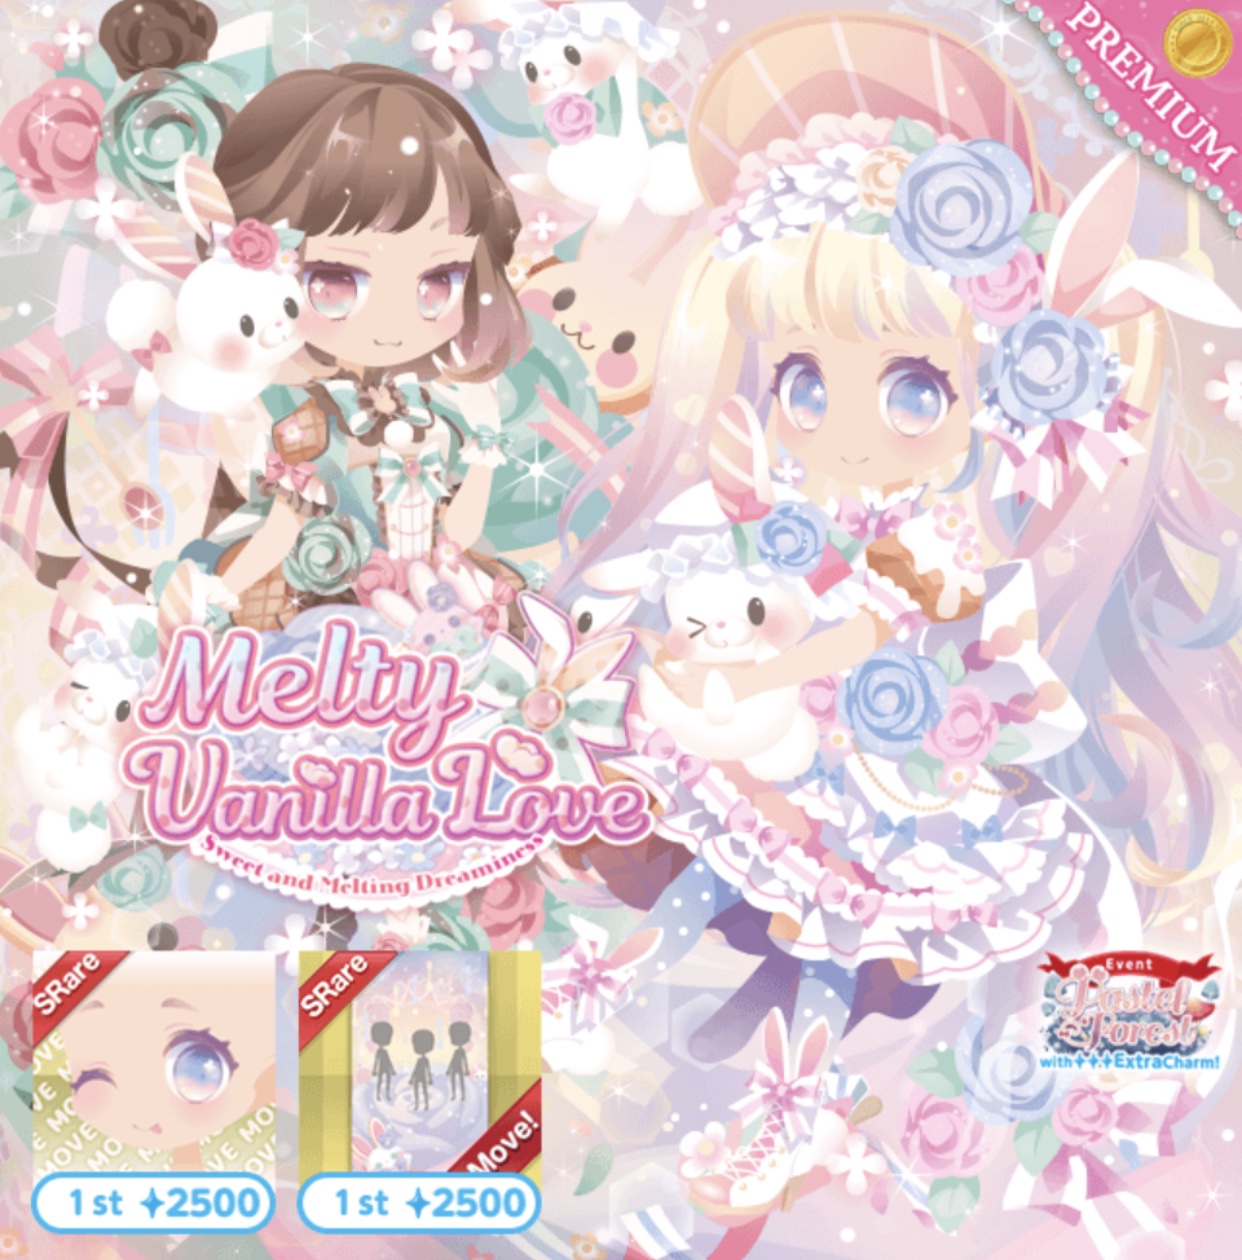 Post by vanilla.cupcake in Gacha Cute Android comments 